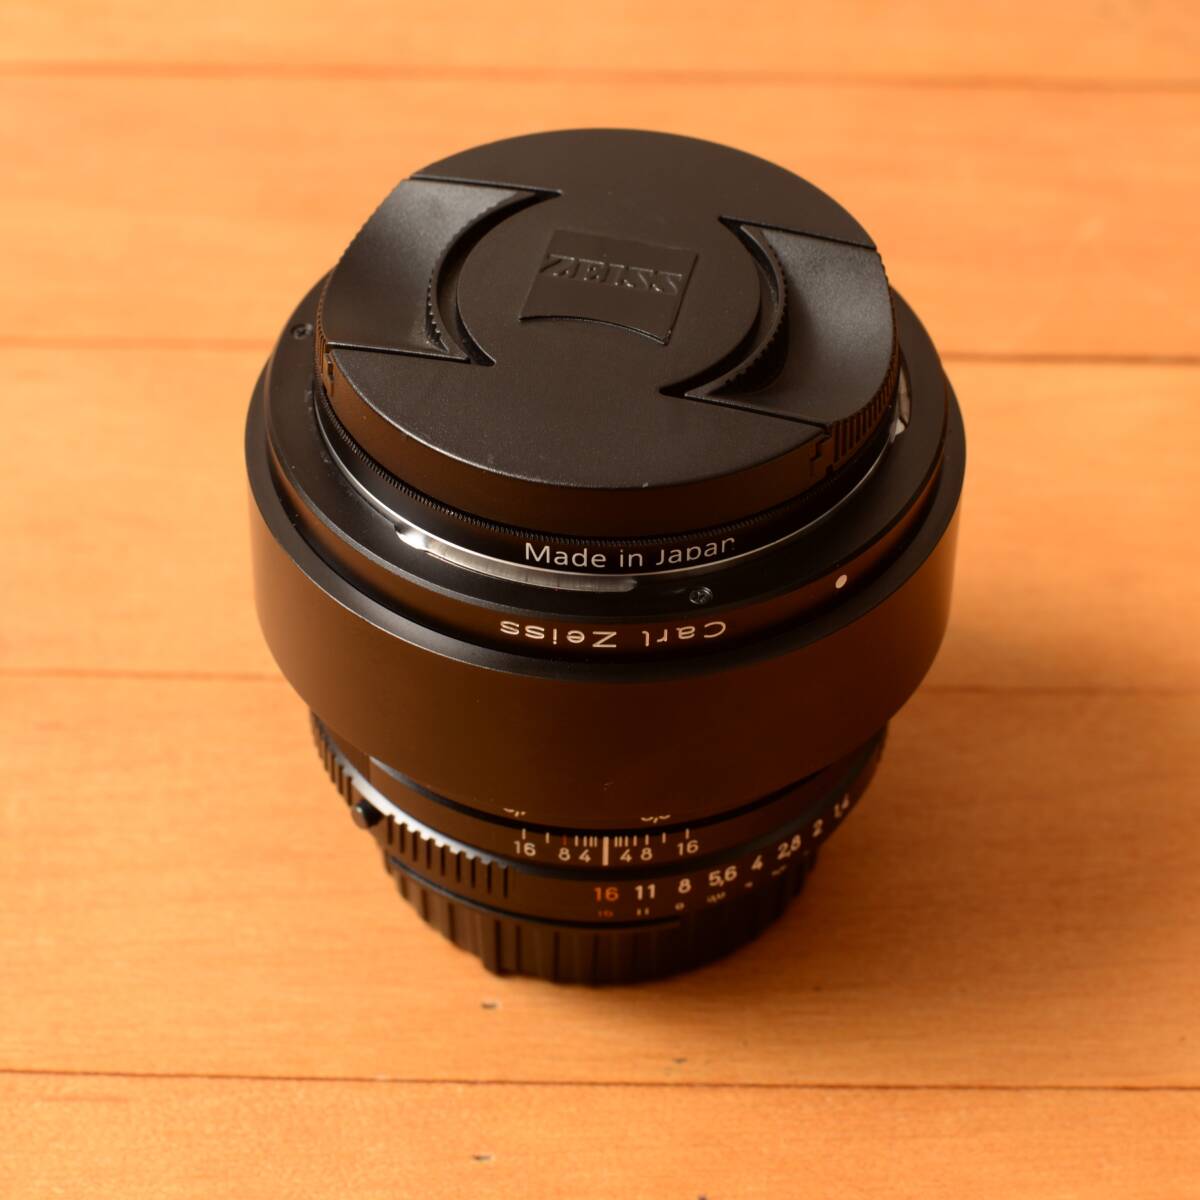 Carl Zeiss Planar T* 50mm F1.4 ZF.2 ニコン用 カールツァイス プラナー